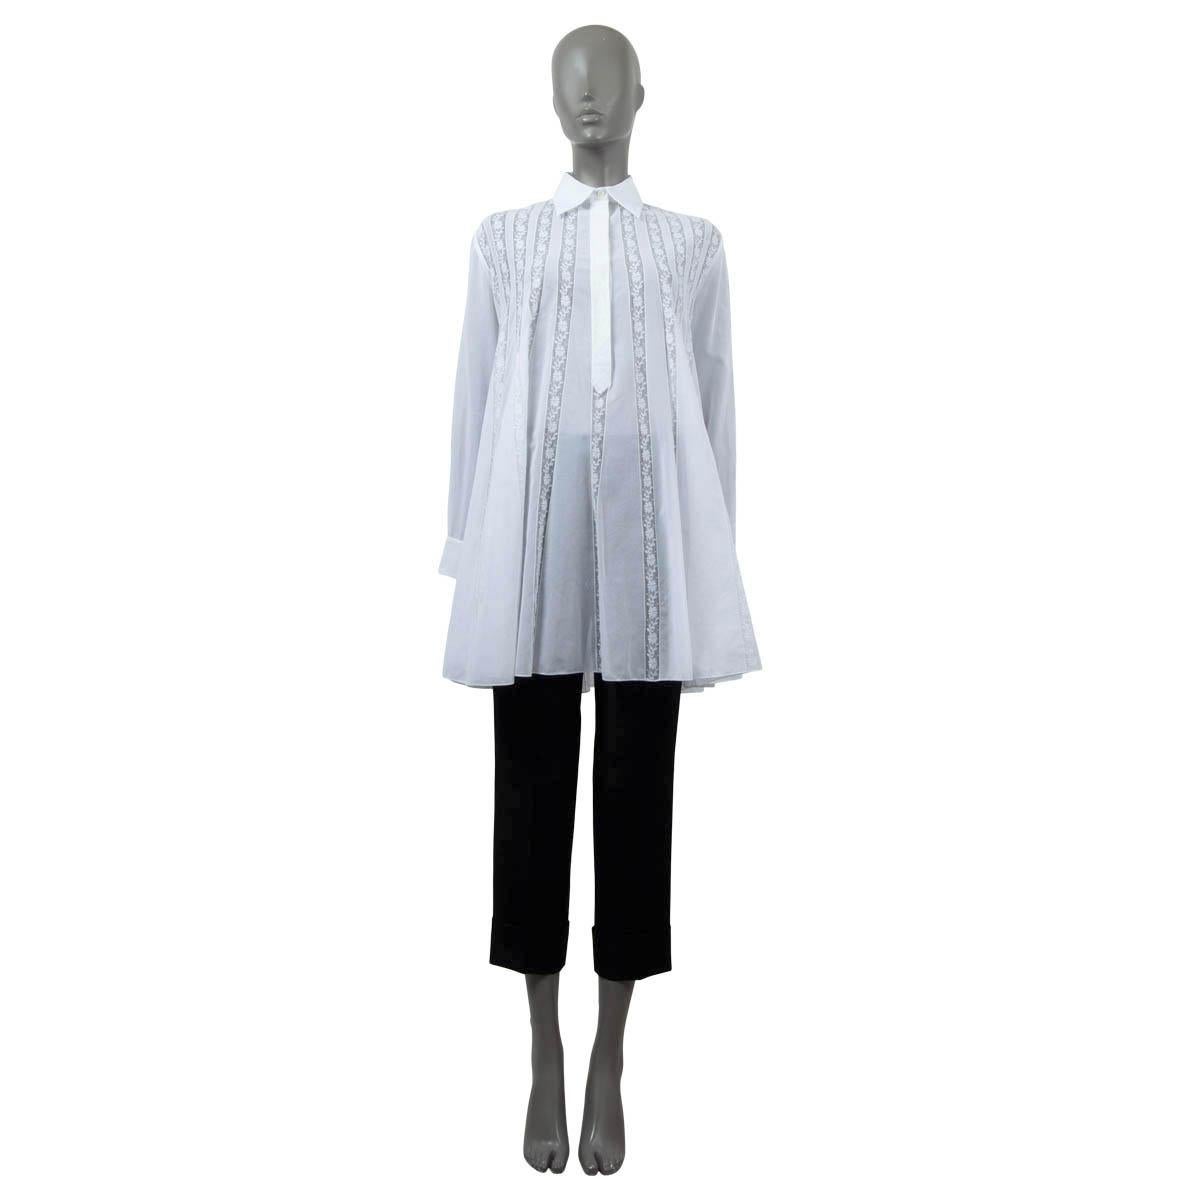 100% authentic Christian Dior 2018 long sleeve A-line lace trim tunic blouse in white sheer cotton. The design features a concealed button-line and floral lace panels. Has been worn and is in excellent condition. 

2018